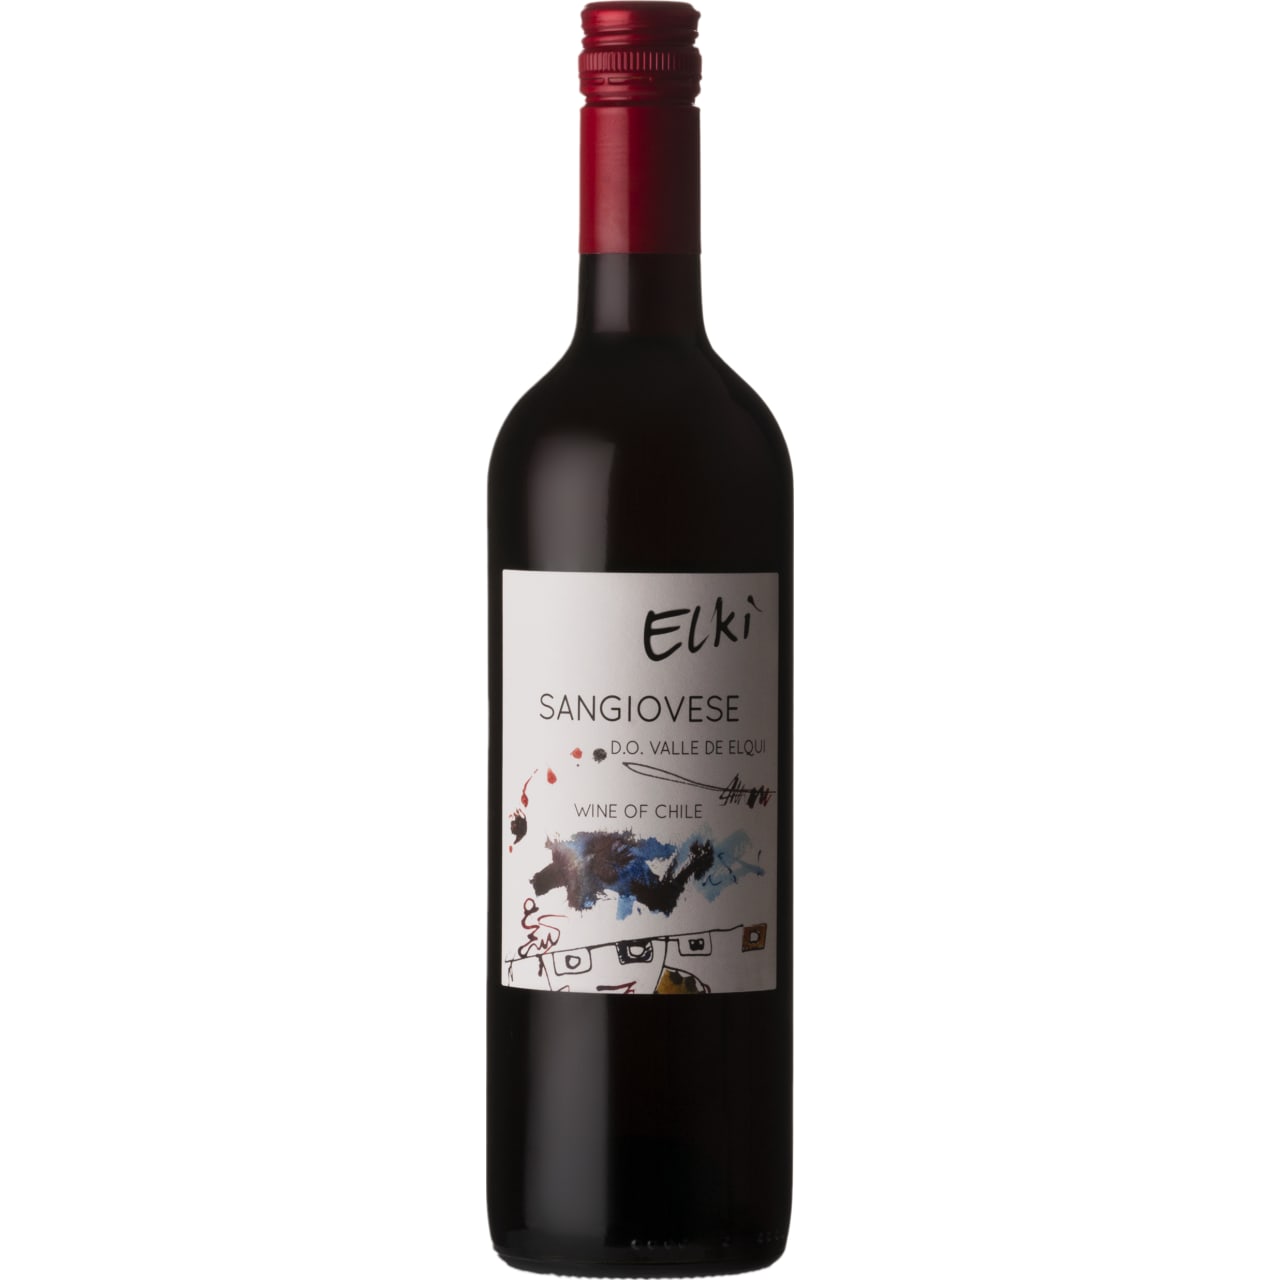 Vibrant, juicy English summer red fruits, a very impressive wine - especially at this price.